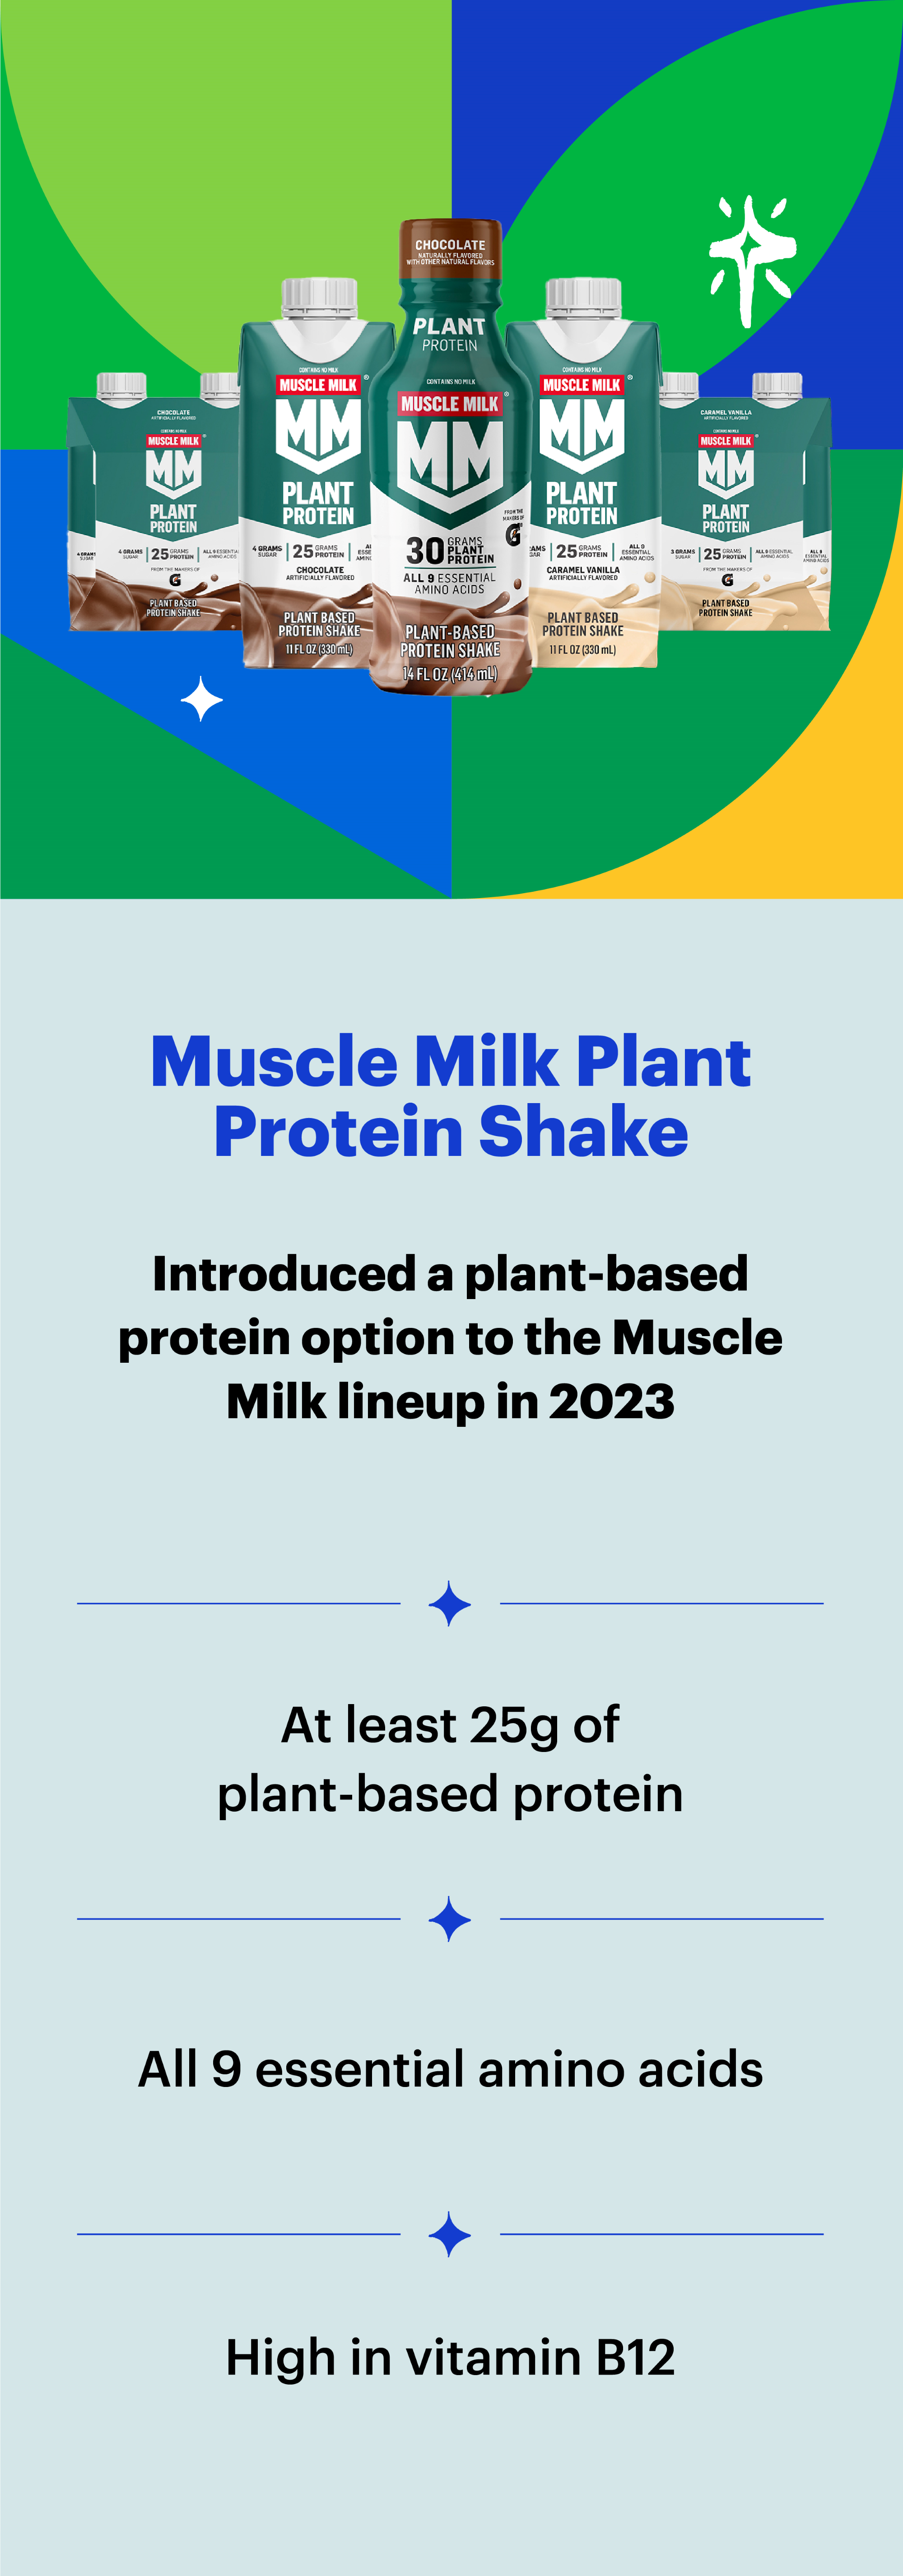 Muscle Milk Plant Protein Shake: Introduced a plant-based option to the Muscle Milk lineup in 2023. At least 25g of plant-based protein. All 9 essential amino acids. High in vitamin B12.